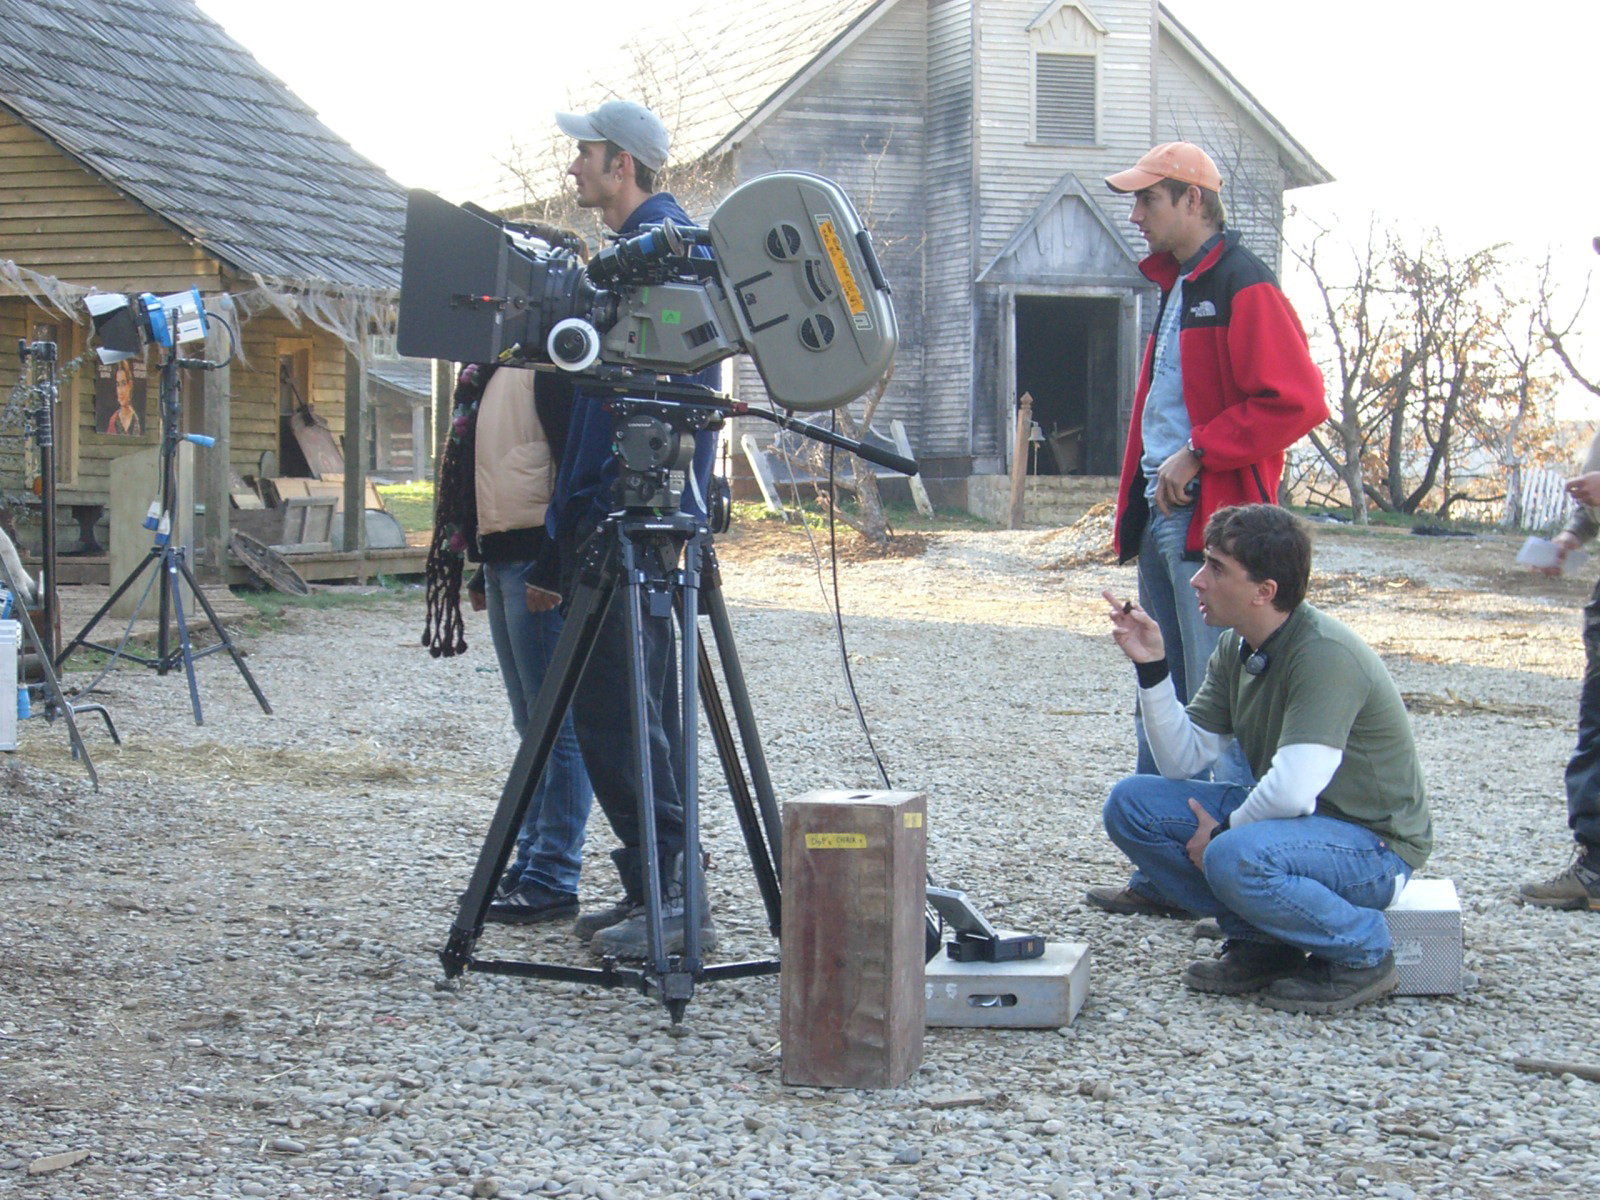 Director and co-writer Anthony C. Ferrante on the set of HEADLESS HORSEMAN